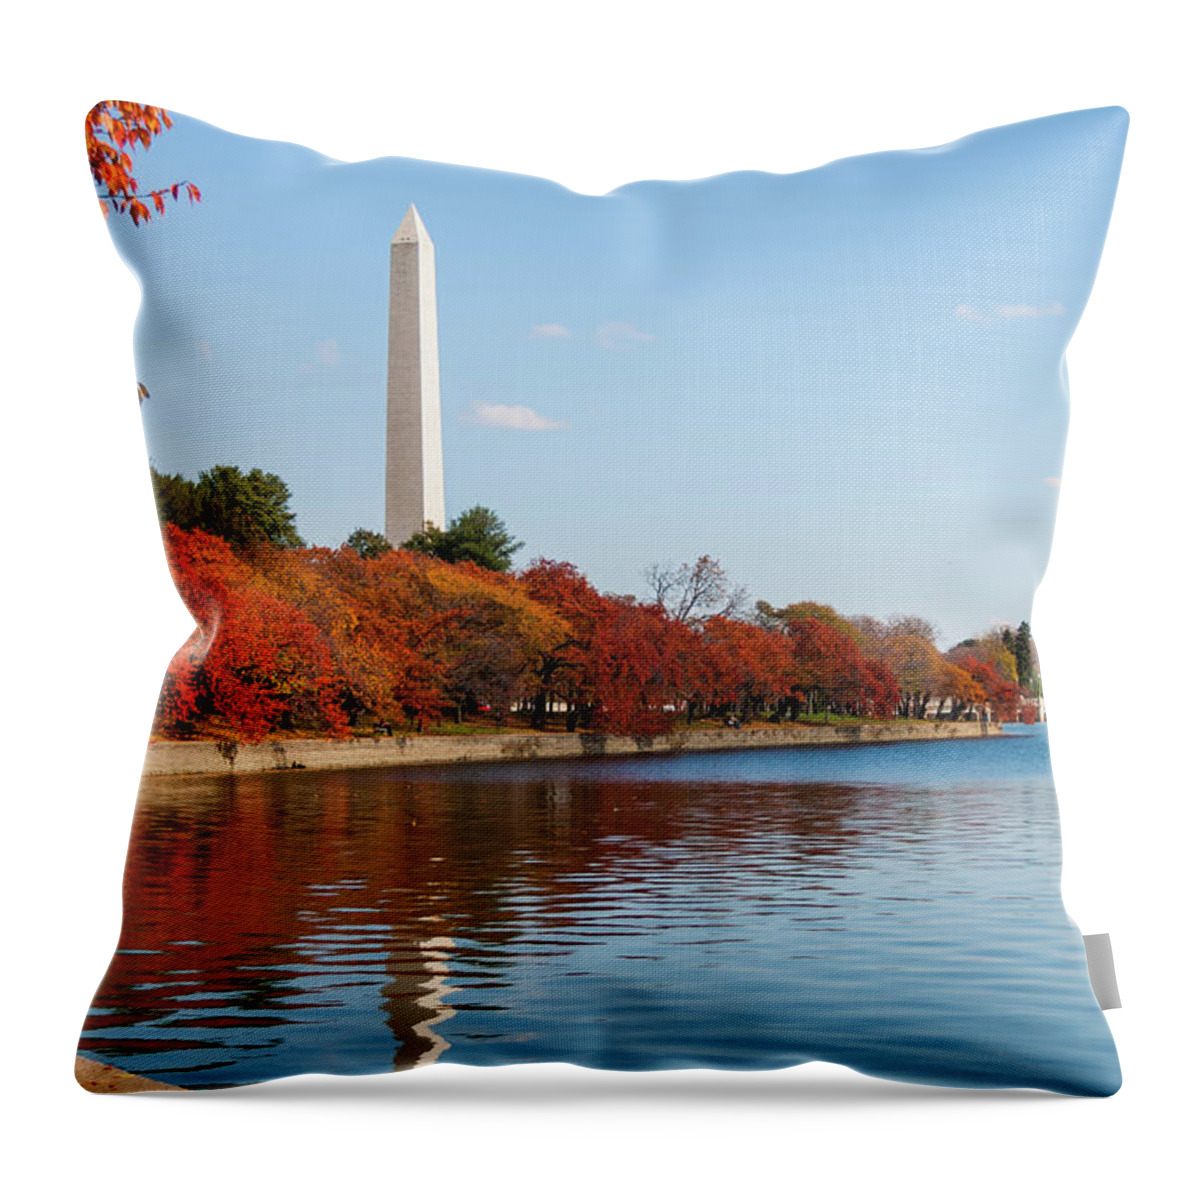 Oil On Canvas Throw Pillow featuring the digital art The Washington Monument soars over the colorful trees on a bright, blue autumn day in Washington, DC by Celestial Images